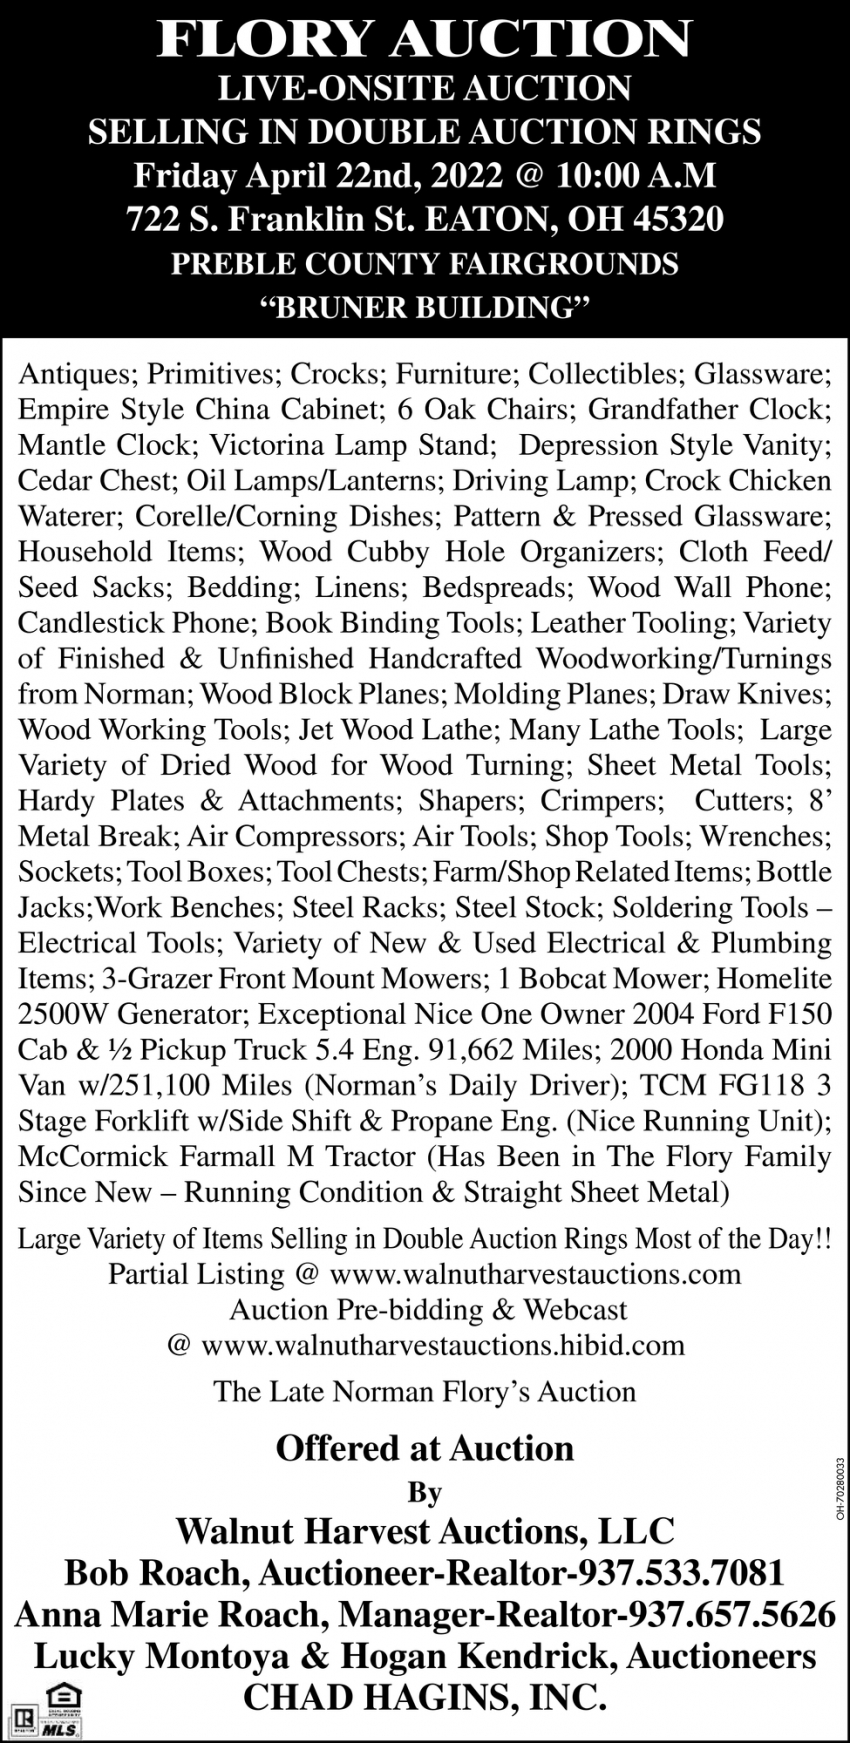 Country Real Estate Auction